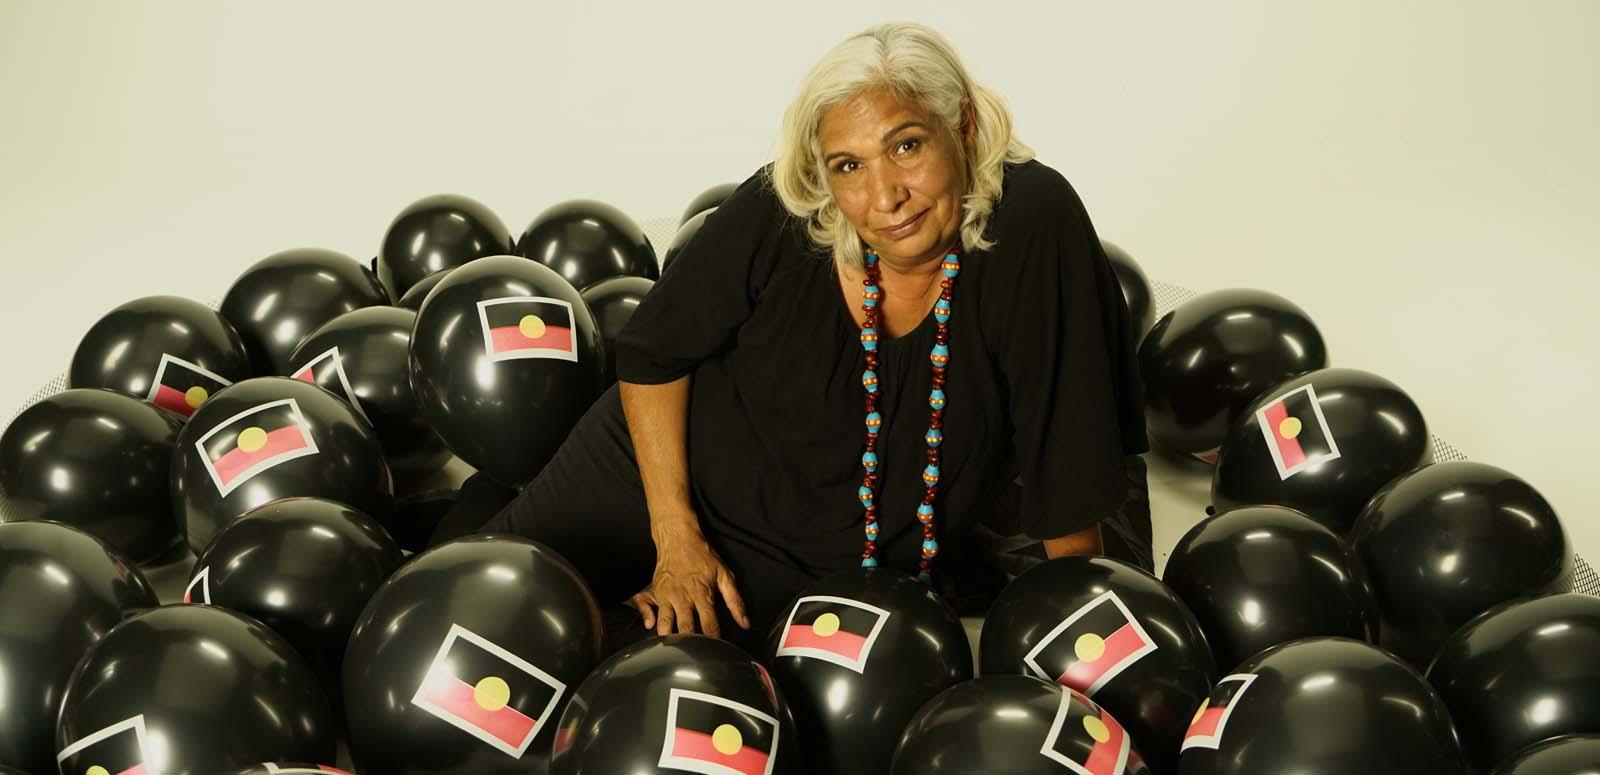 Trisha Morton-Thomas wearing a black dress and surrounded by black balloons with the Aboriginal flag on them